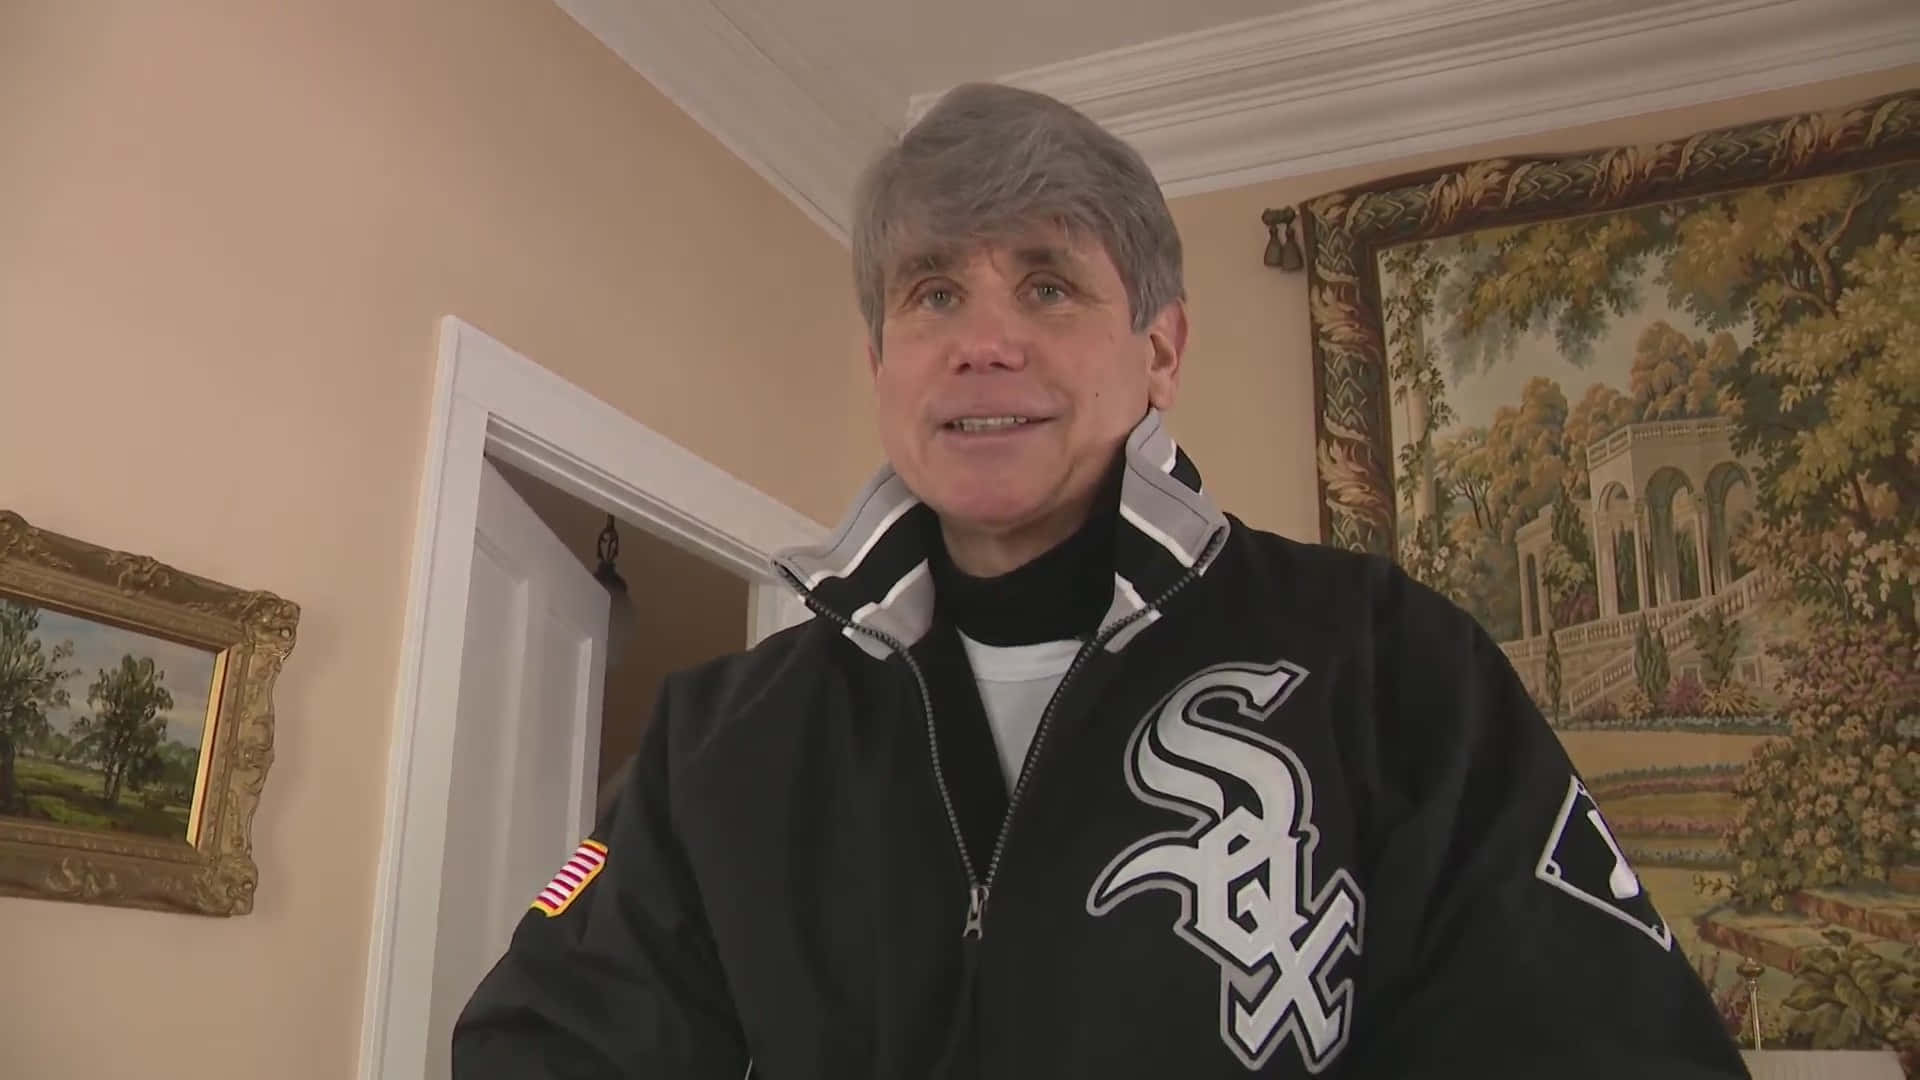 Rod Blagojevich In Jacket At Home Wallpaper